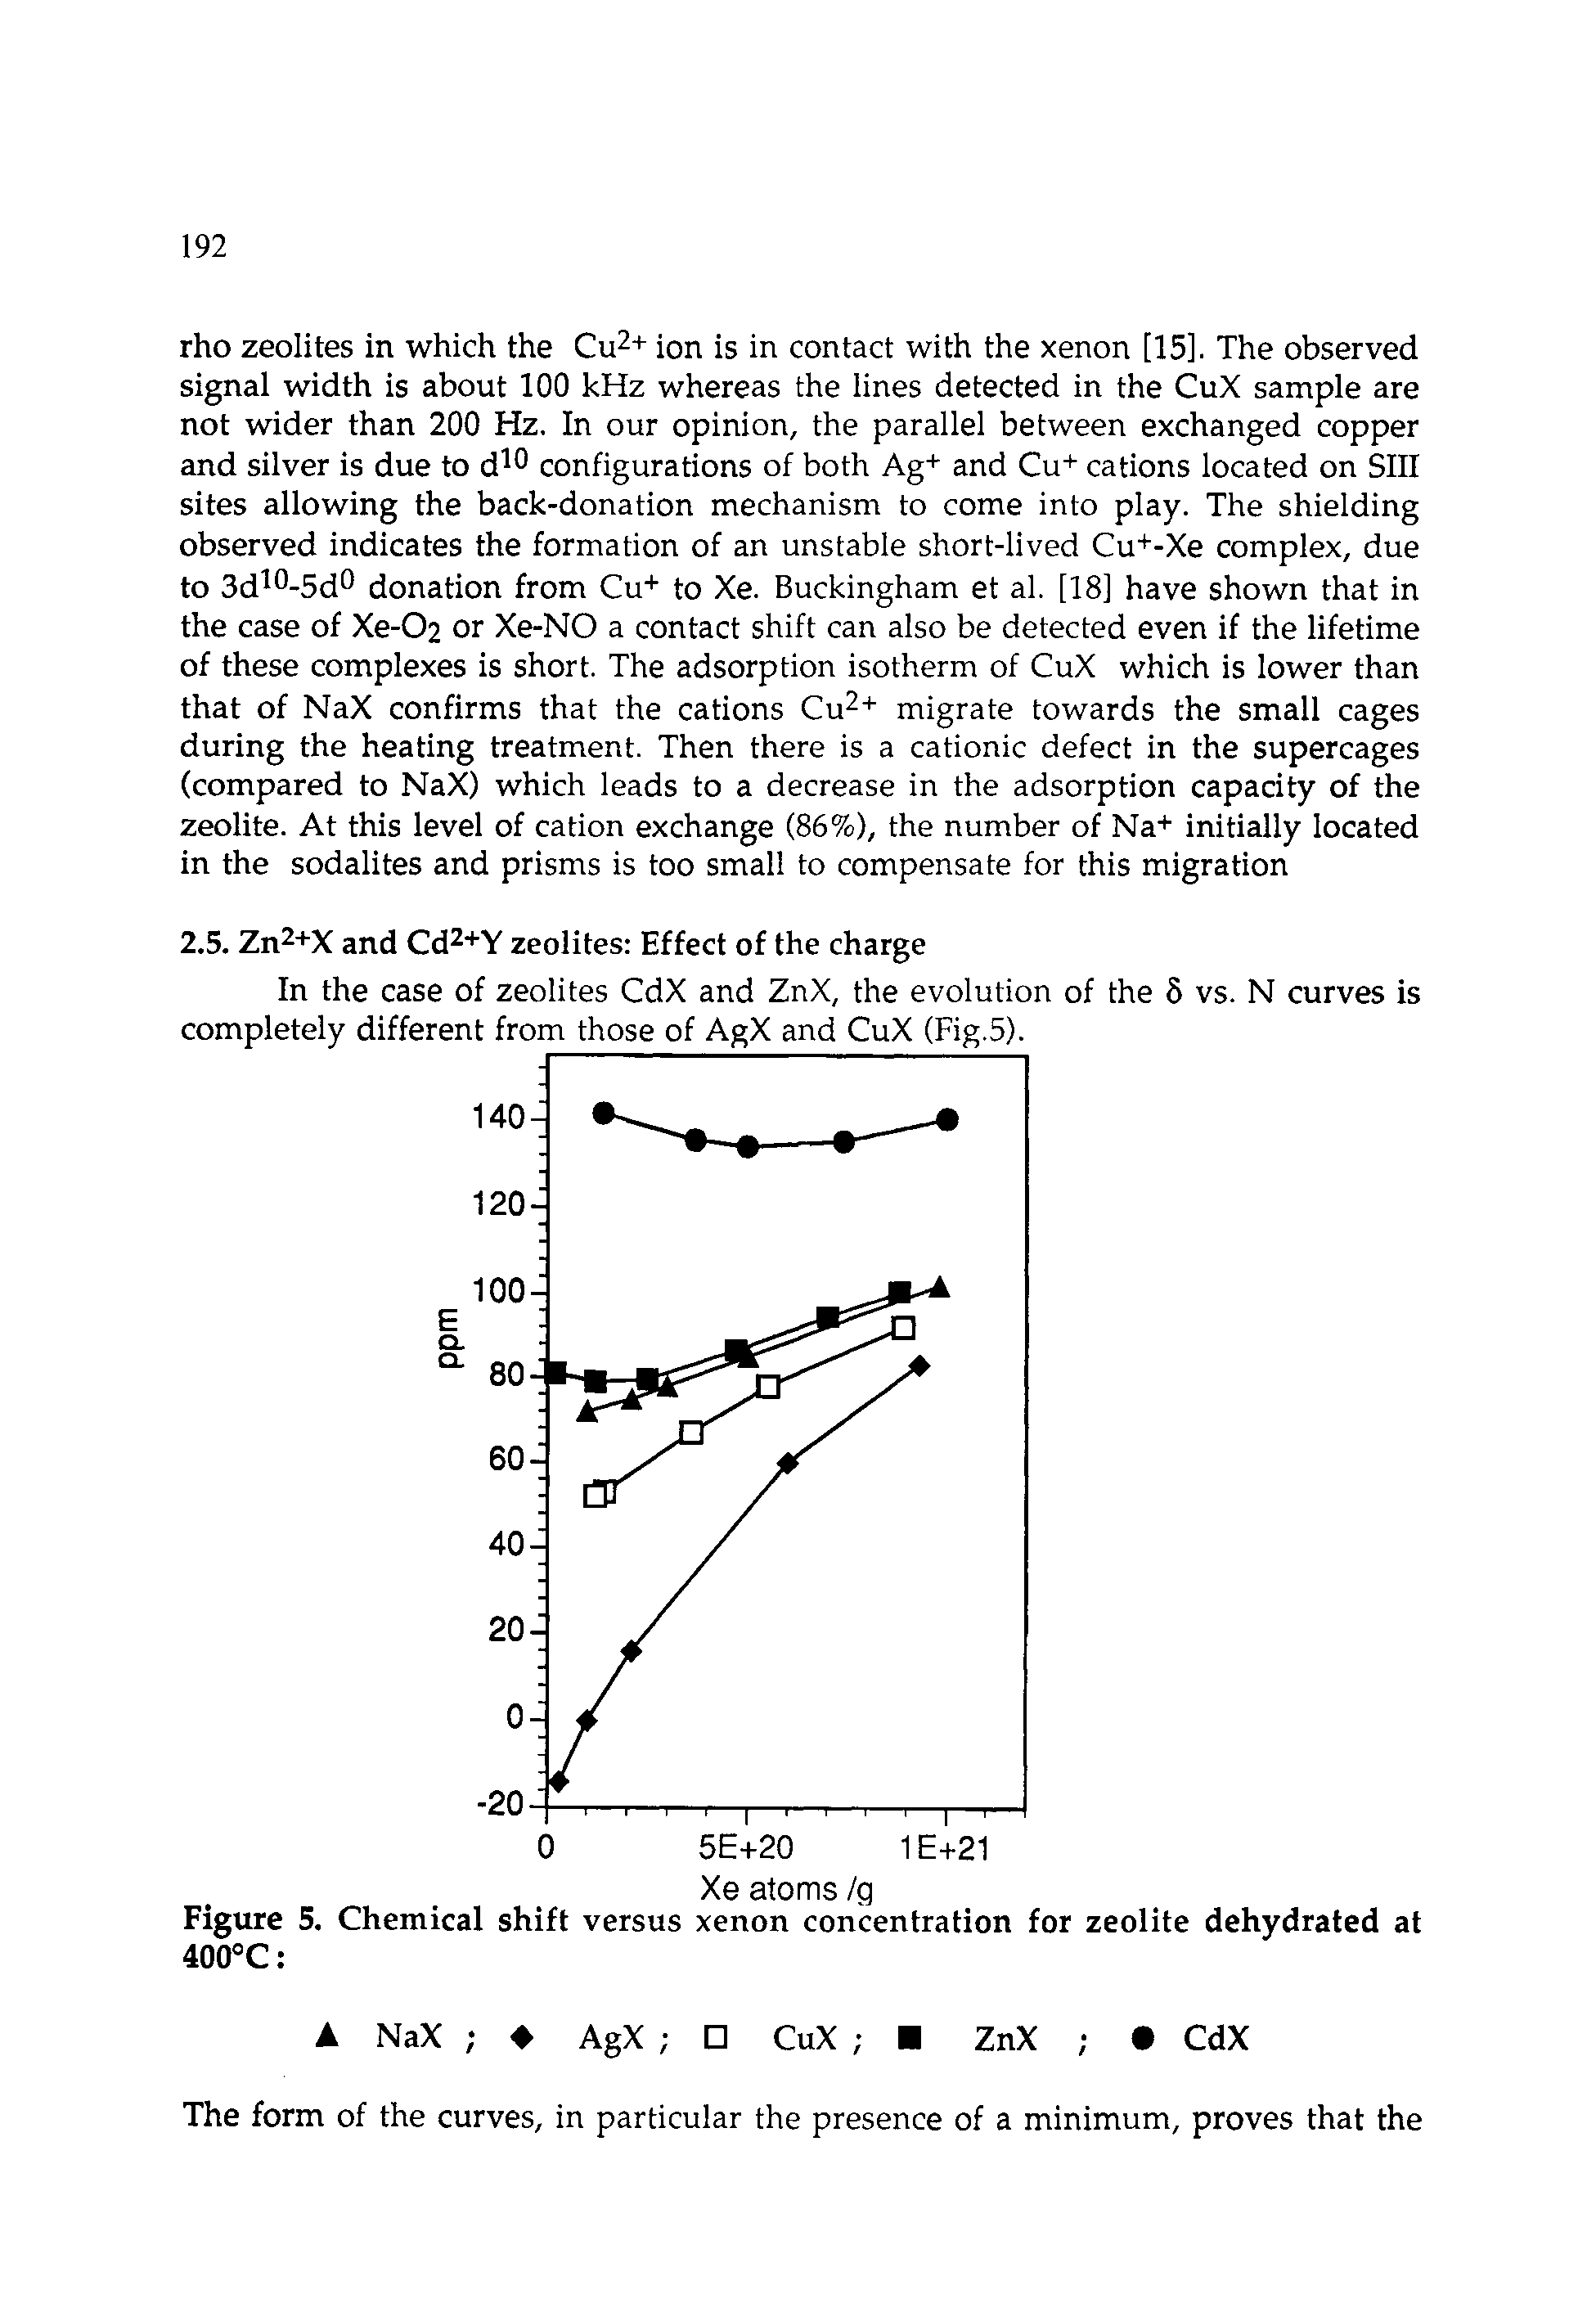 Figure 5. Chemical shift versus xenon concentration for zeolite dehydrated at 400°C ...